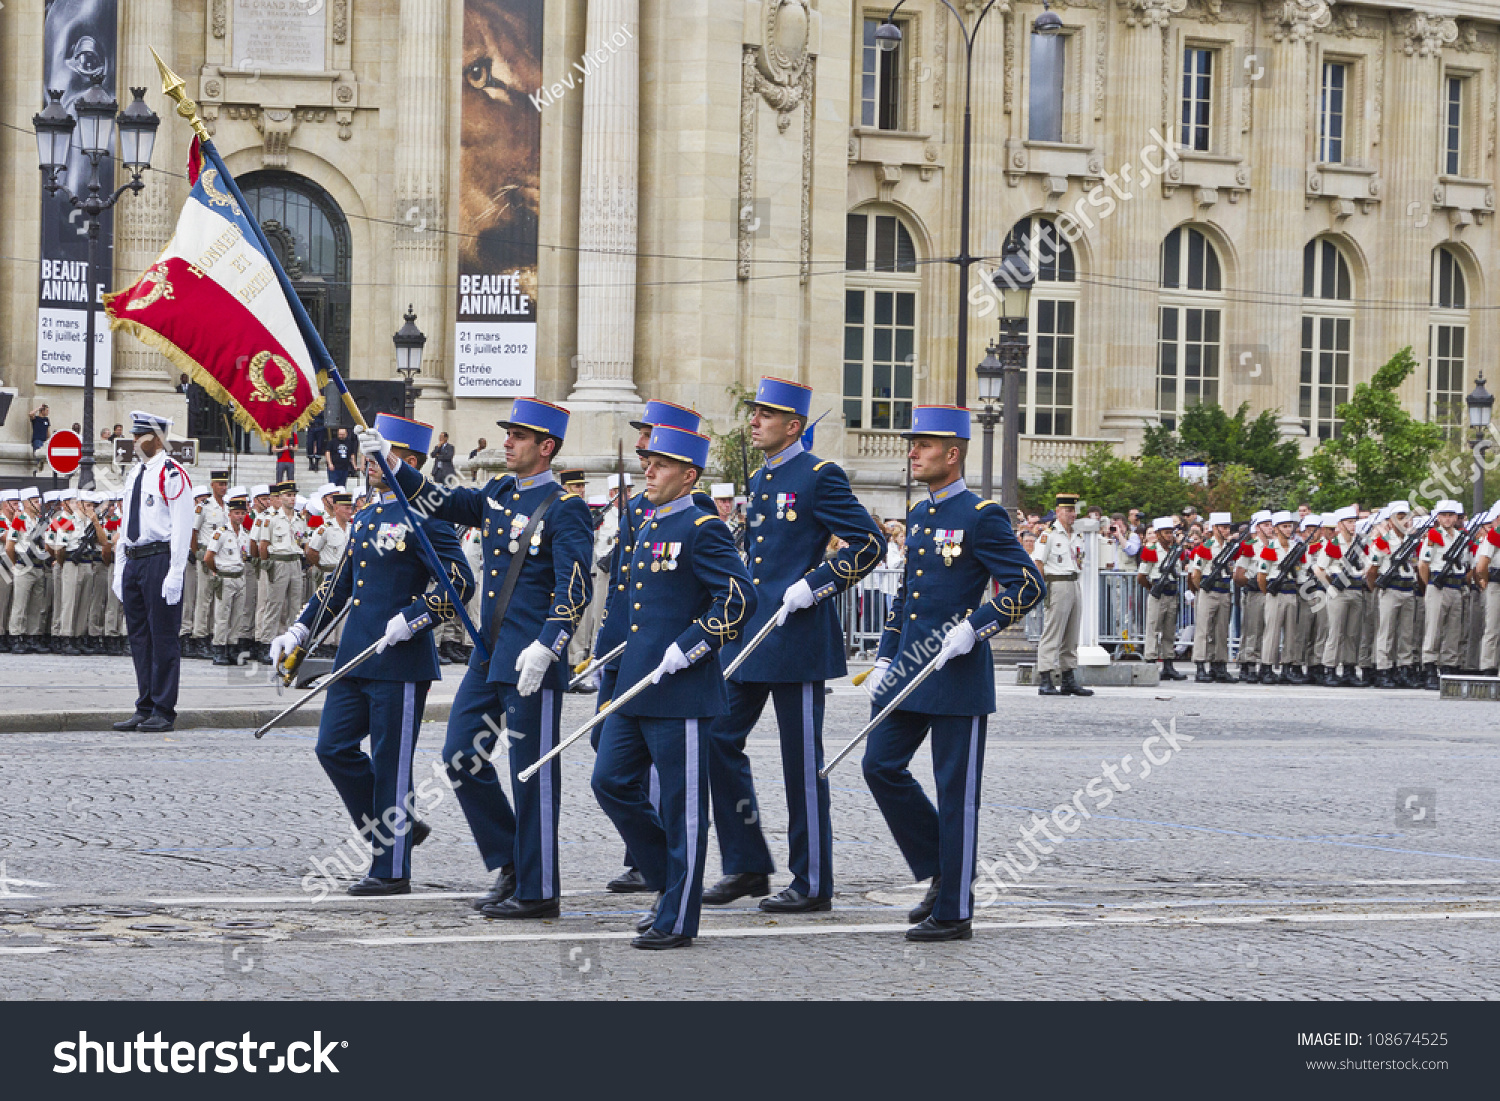 Paris France July 14 Joint Military Stock Photo 108674525 - Shutterstock